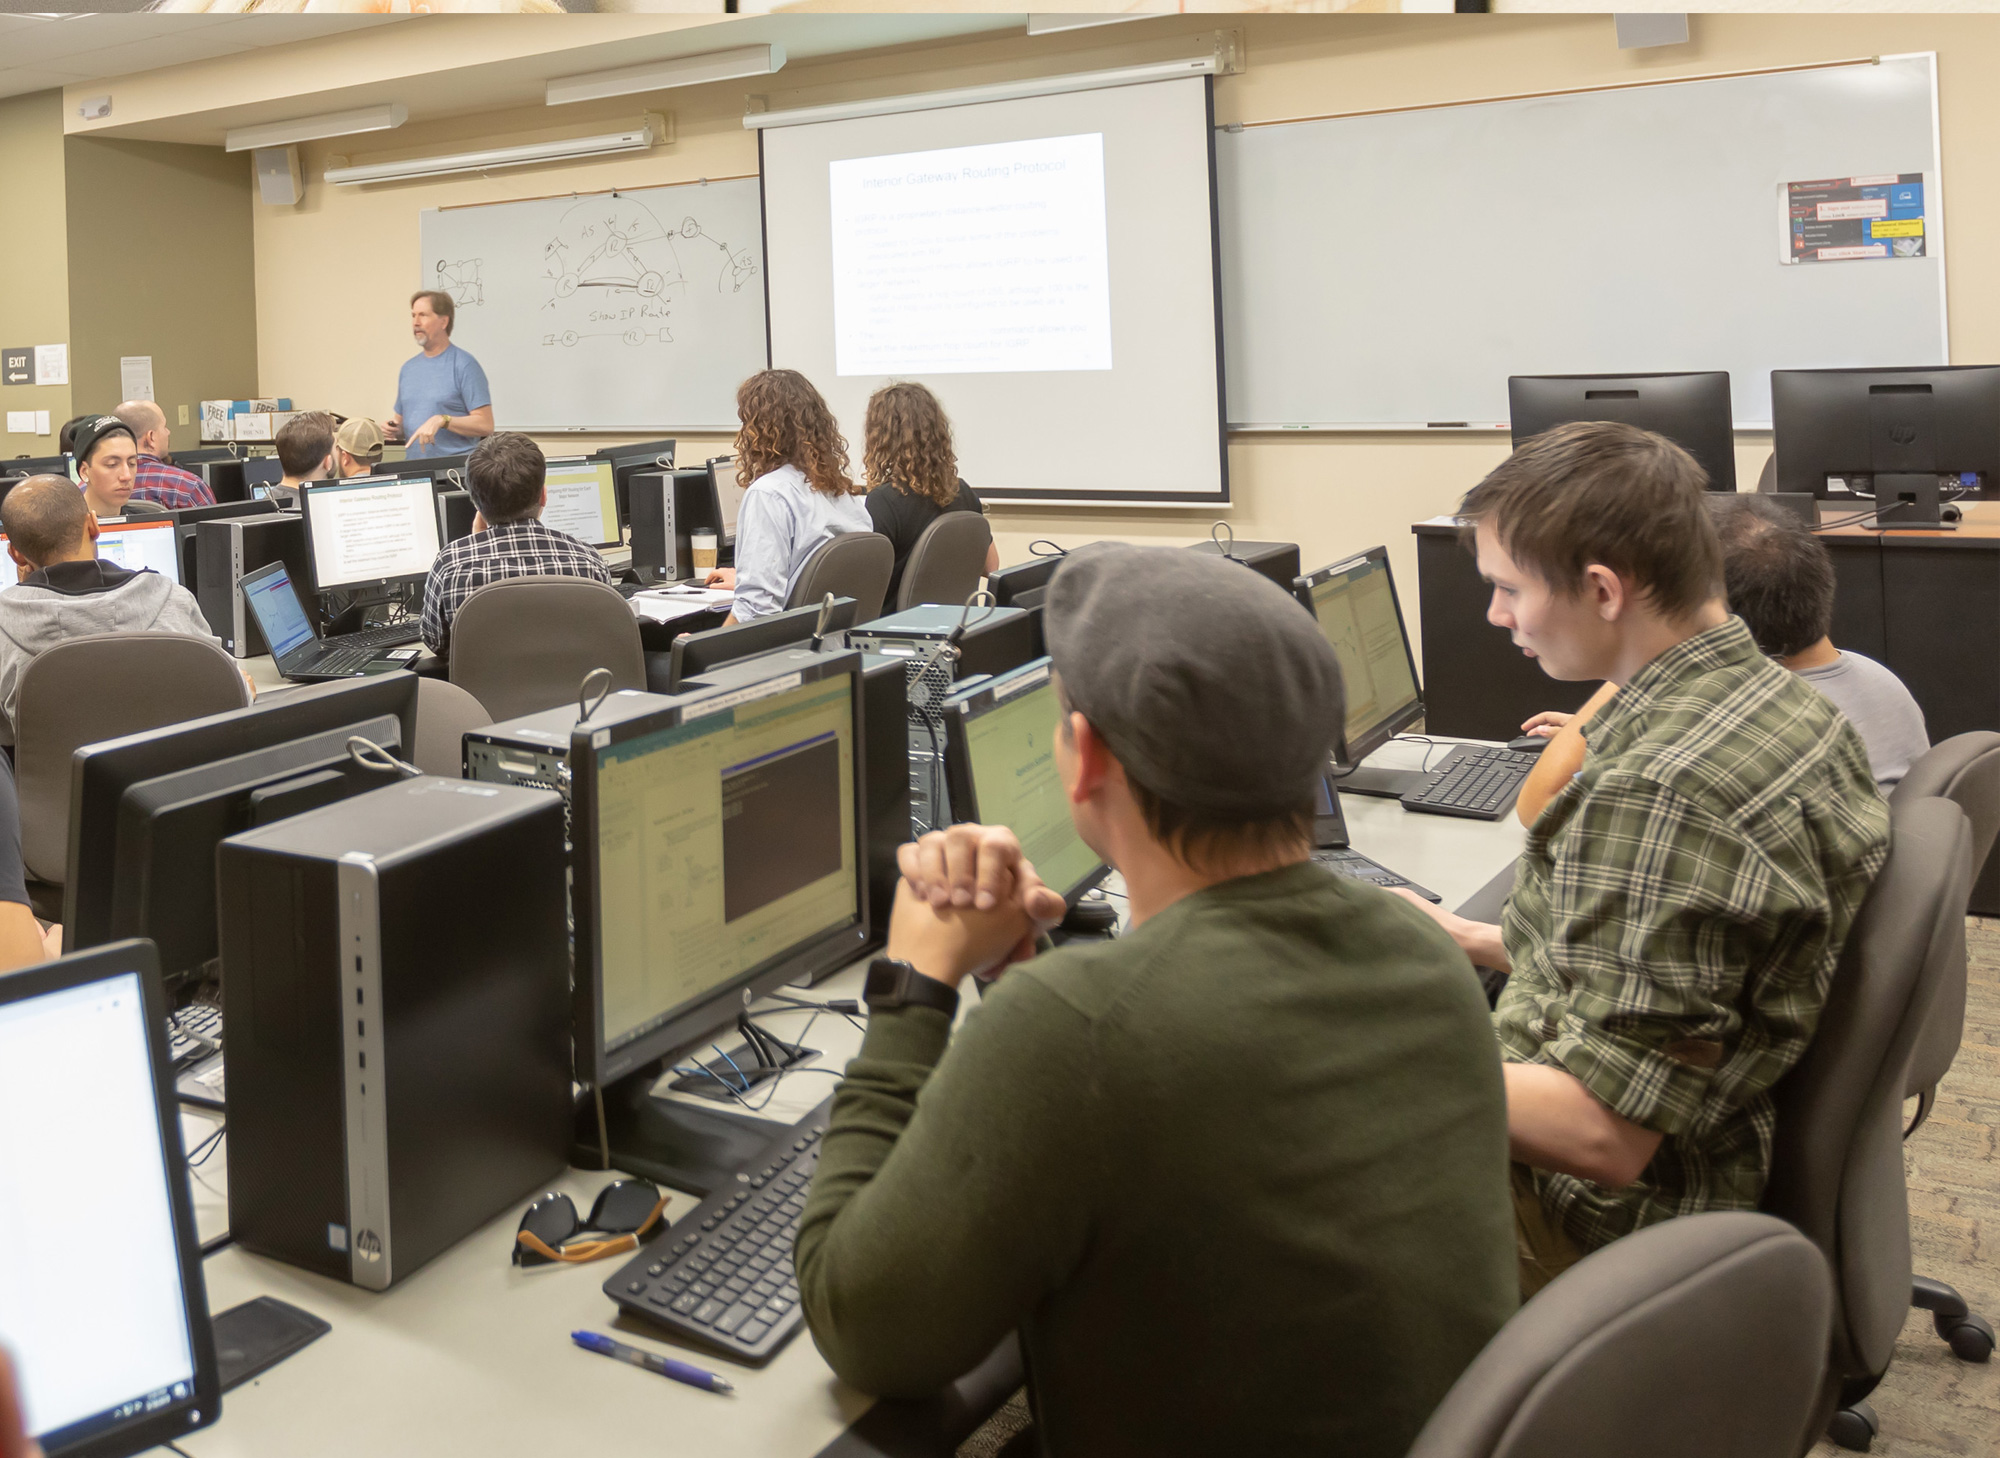 Students and instructor in computer science class